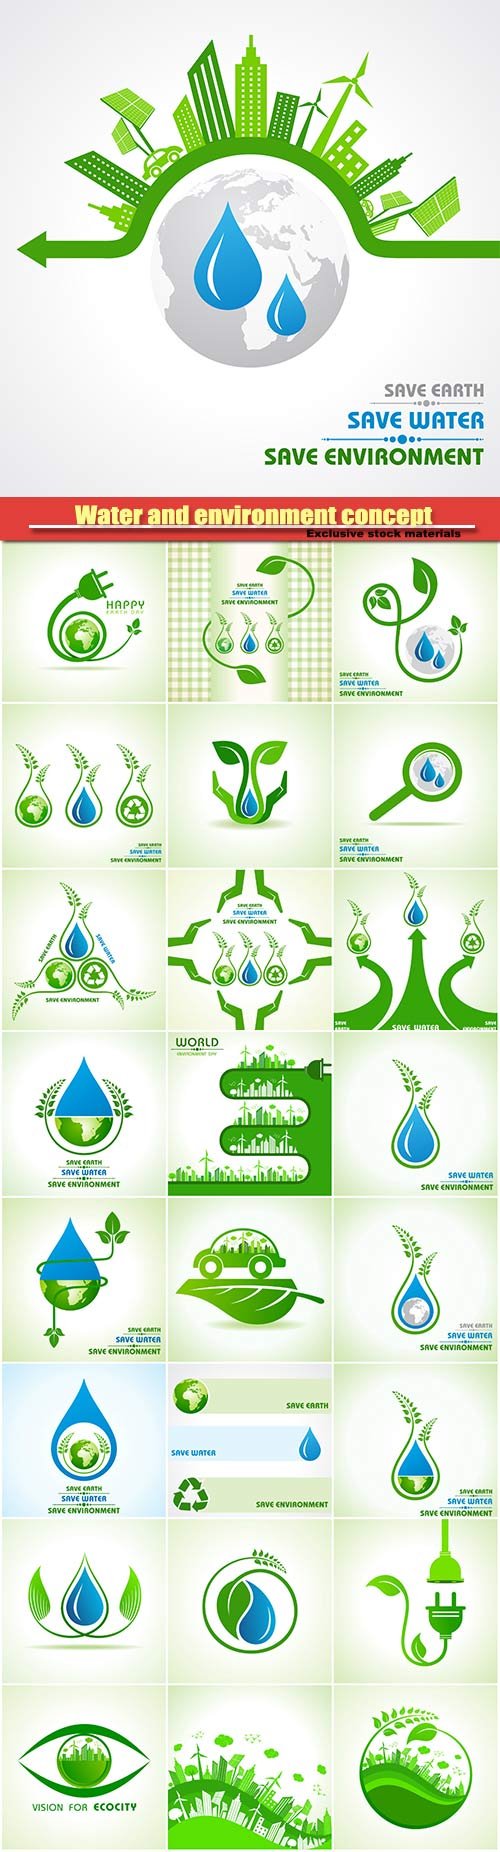 Save earth, water and environment concept